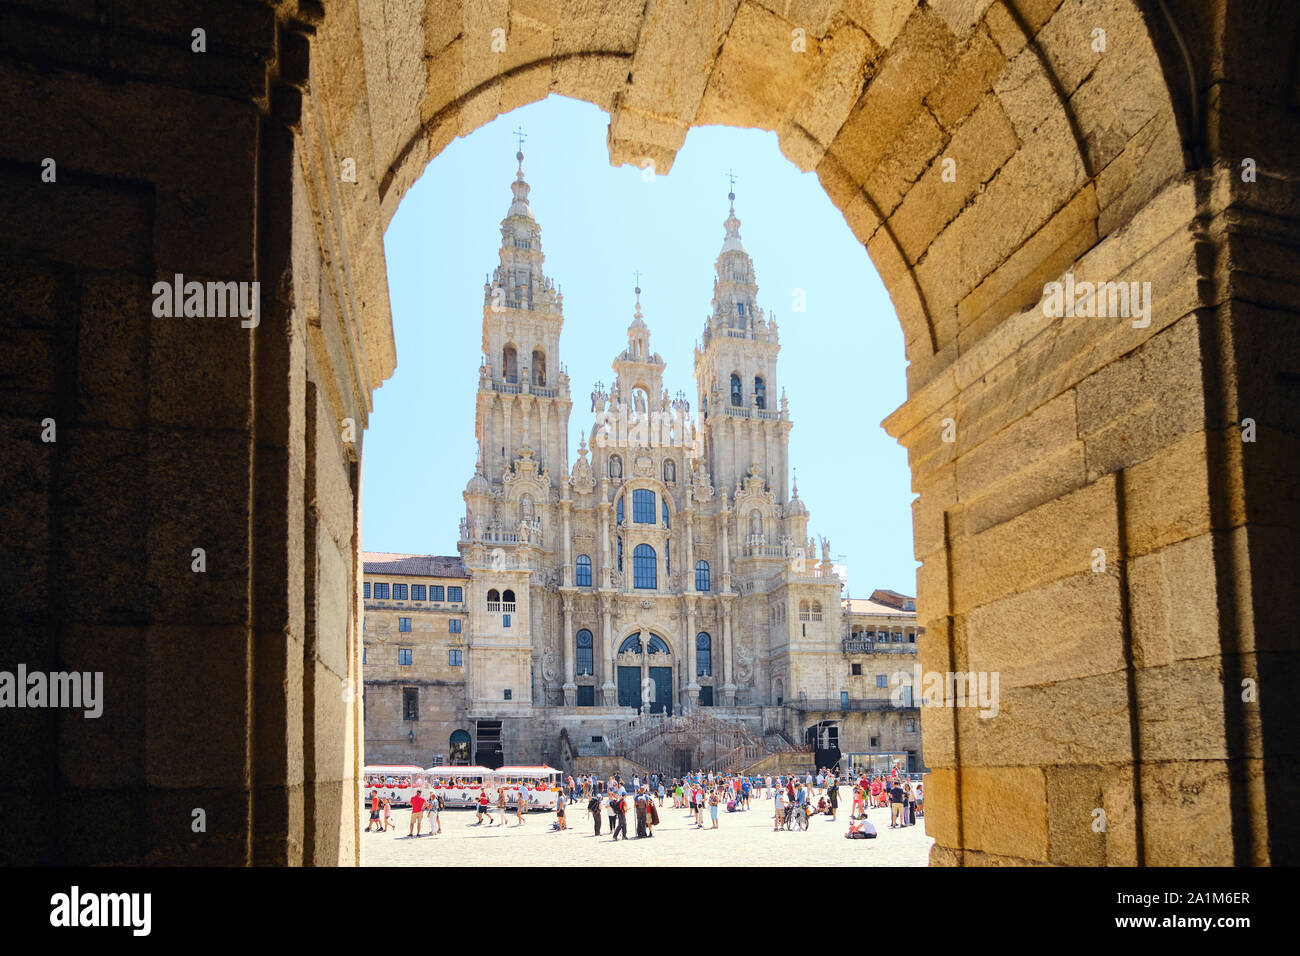 SANTIAGO DE COMPOSTELA, SPAIN - JULY 2019: Tourists and pilgrims near the Cathedral of Santiago de Compostela, famous Spanish town at the end of Camin Stock Photo